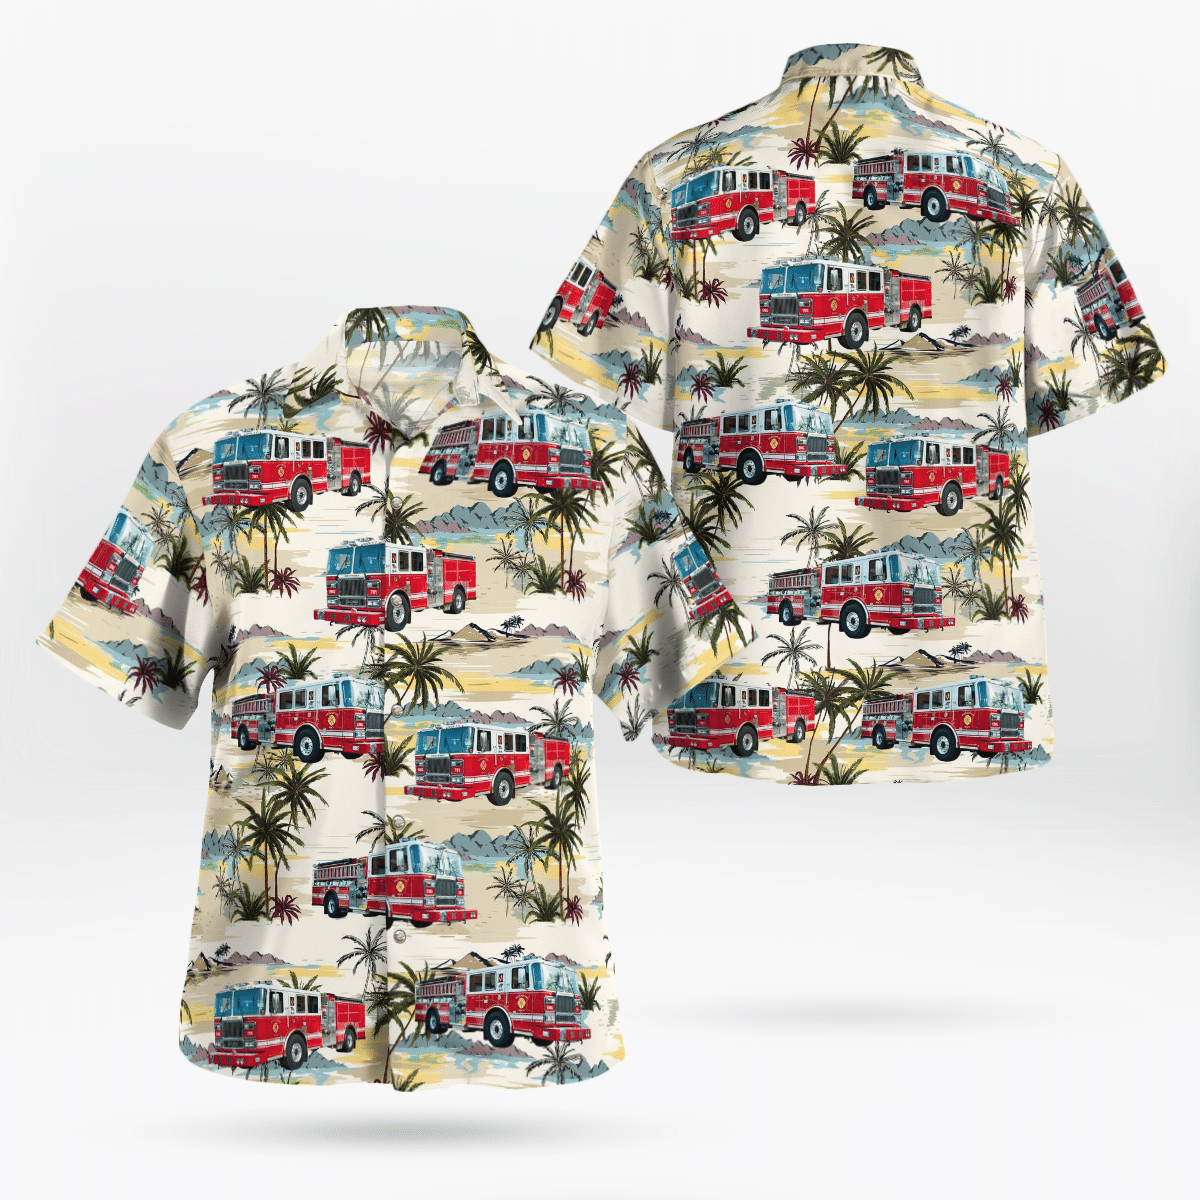 If you want to be noticed, wear These Trendy Hawaiian Shirt 138